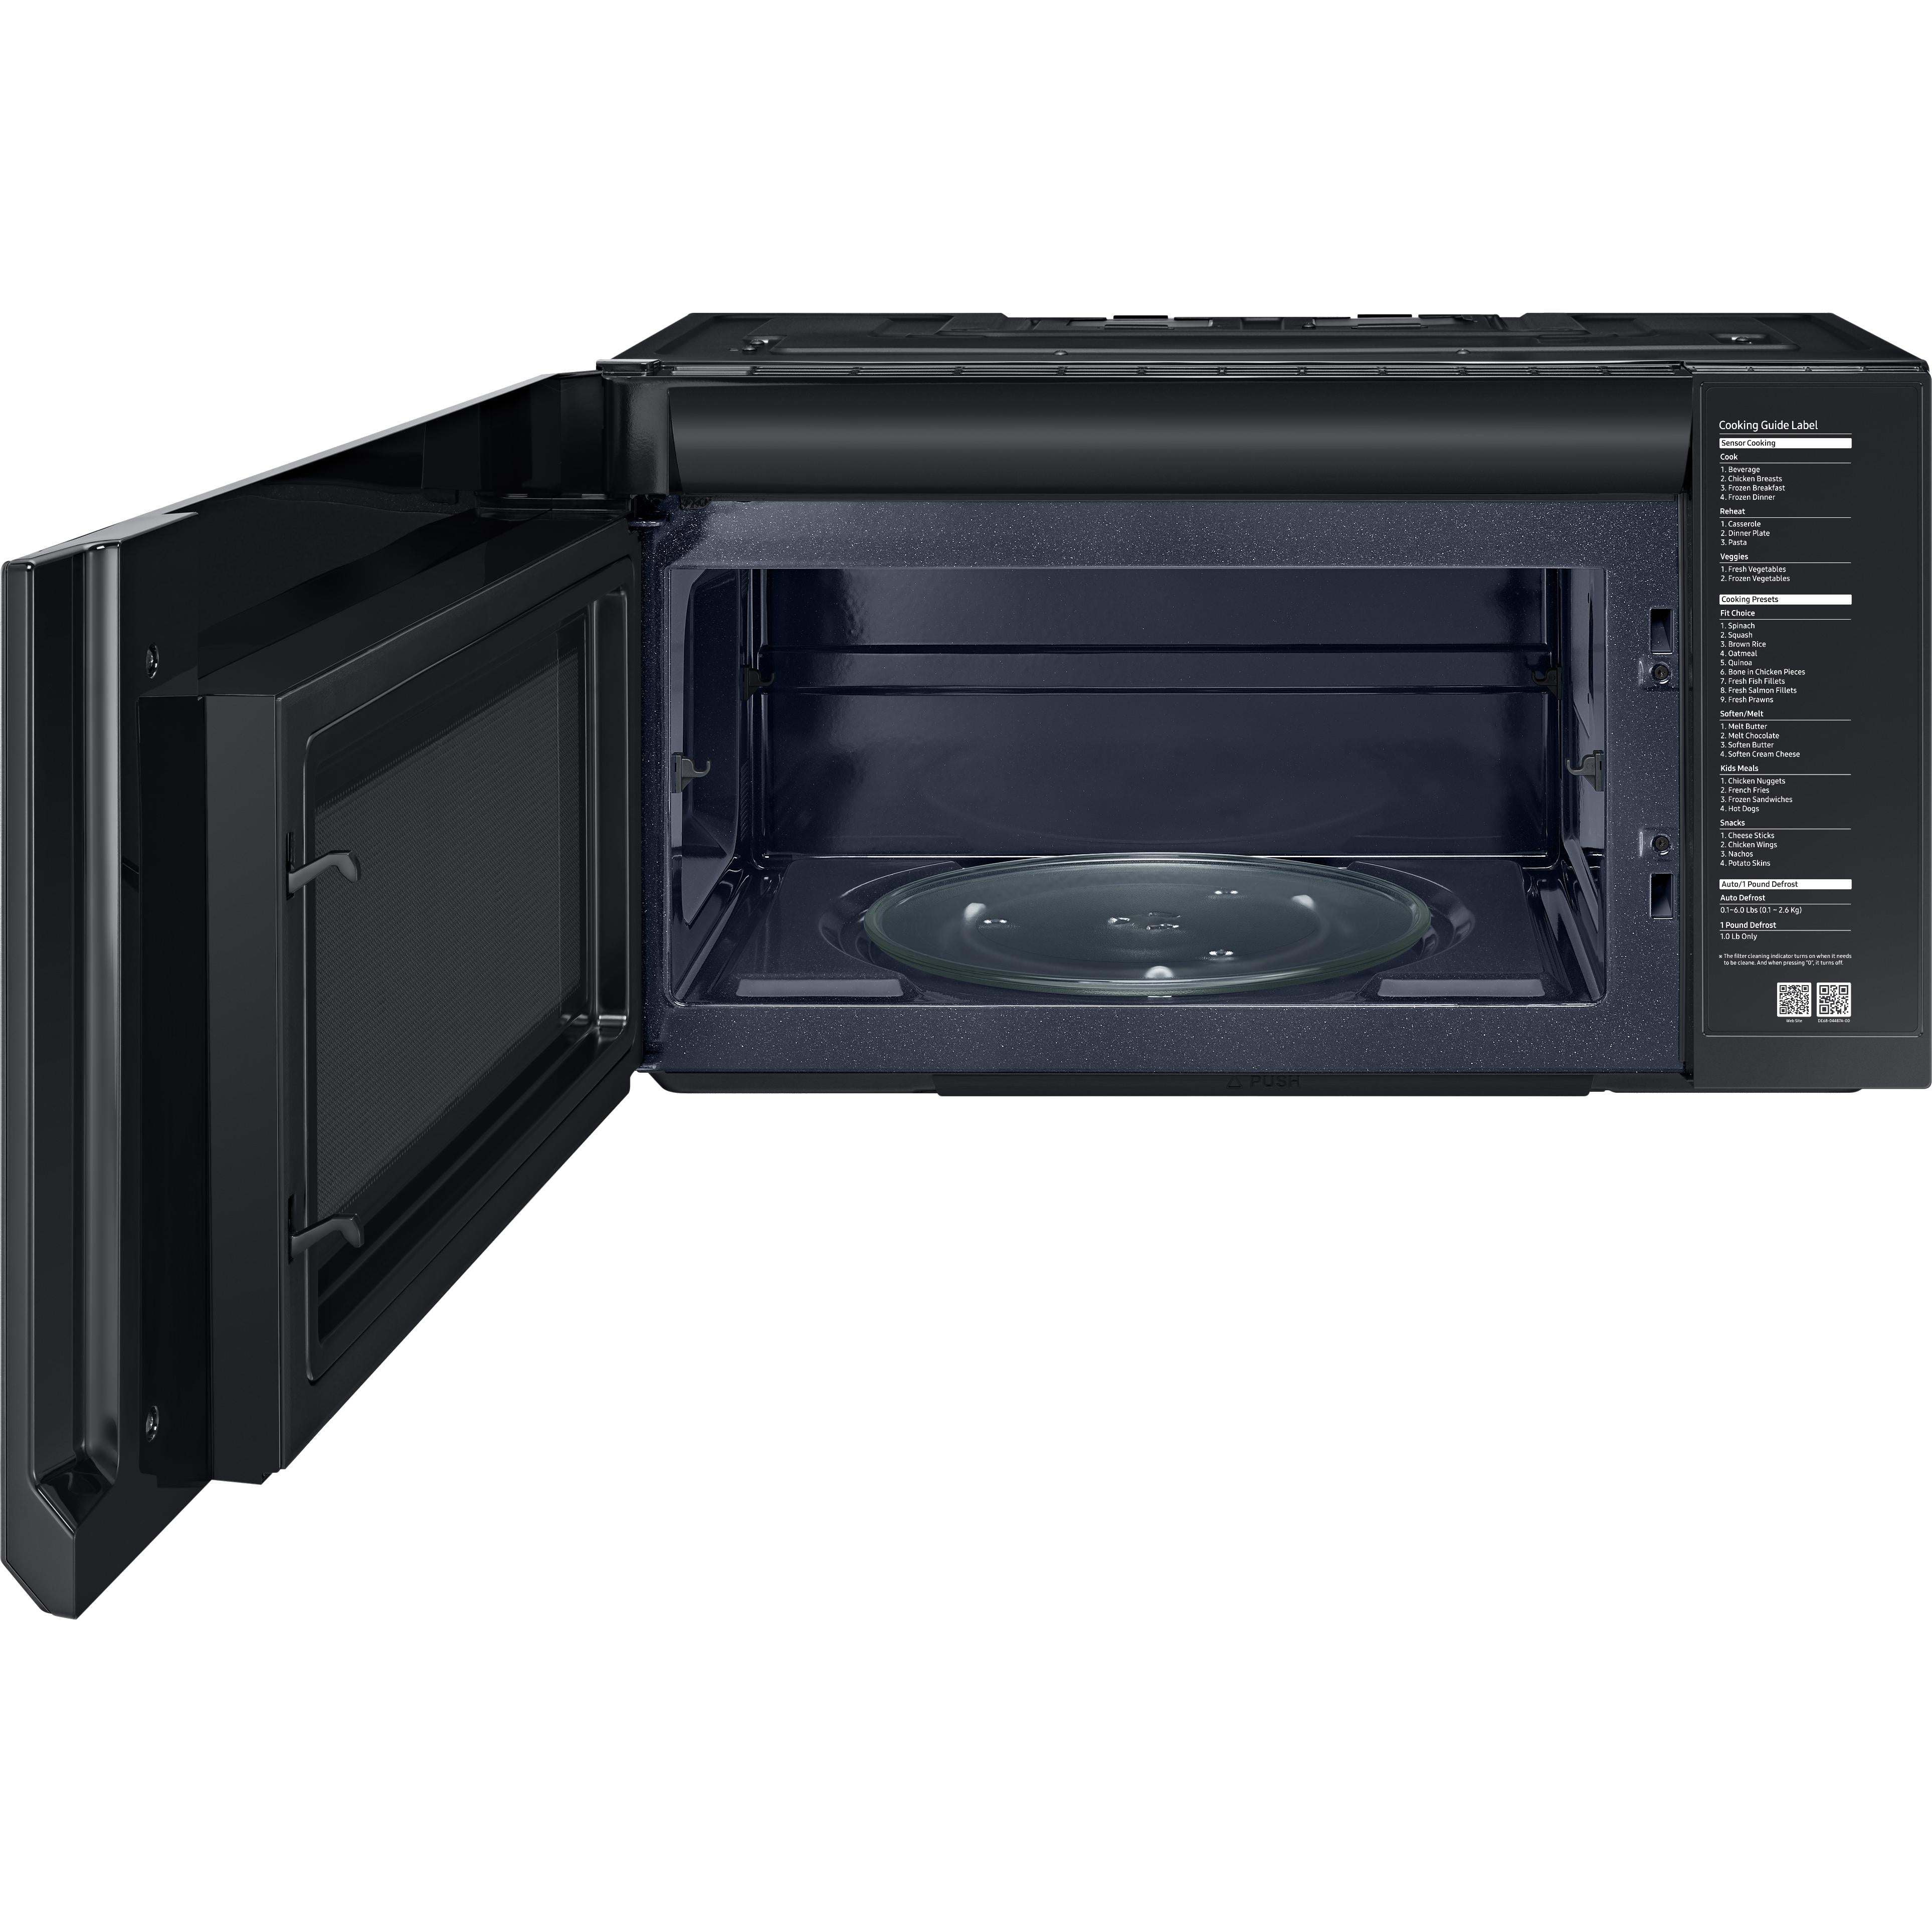 Samsung 30-inch, 2.1 cu.ft. Over-the-Range Microwave Oven with Ventilation System ME21M706BAG/AA